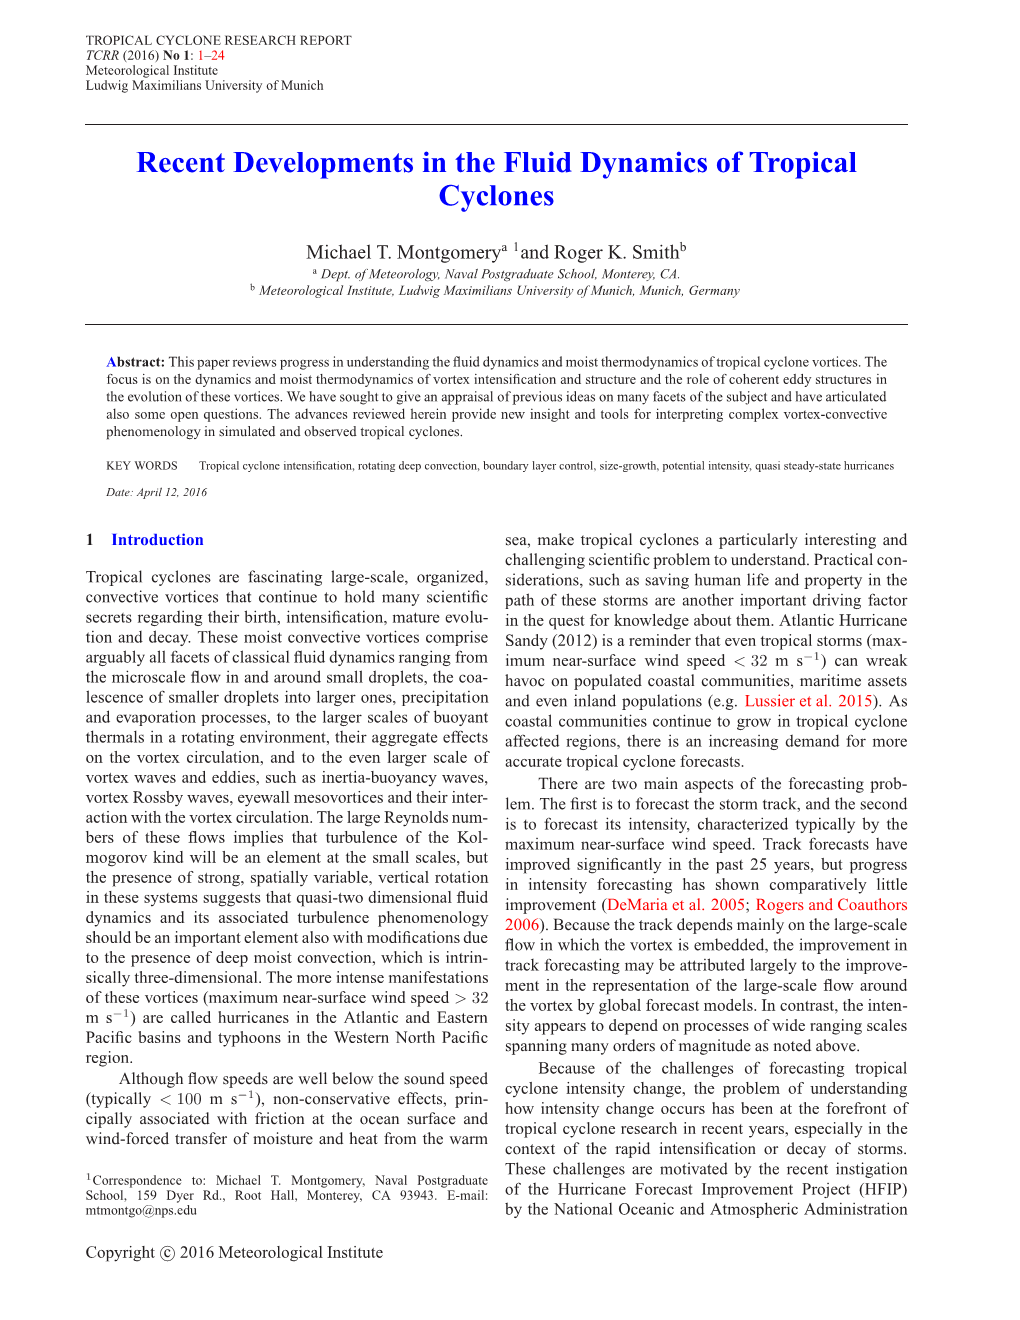 Recent Developments in the Fluid Dynamics of Tropical Cyclones